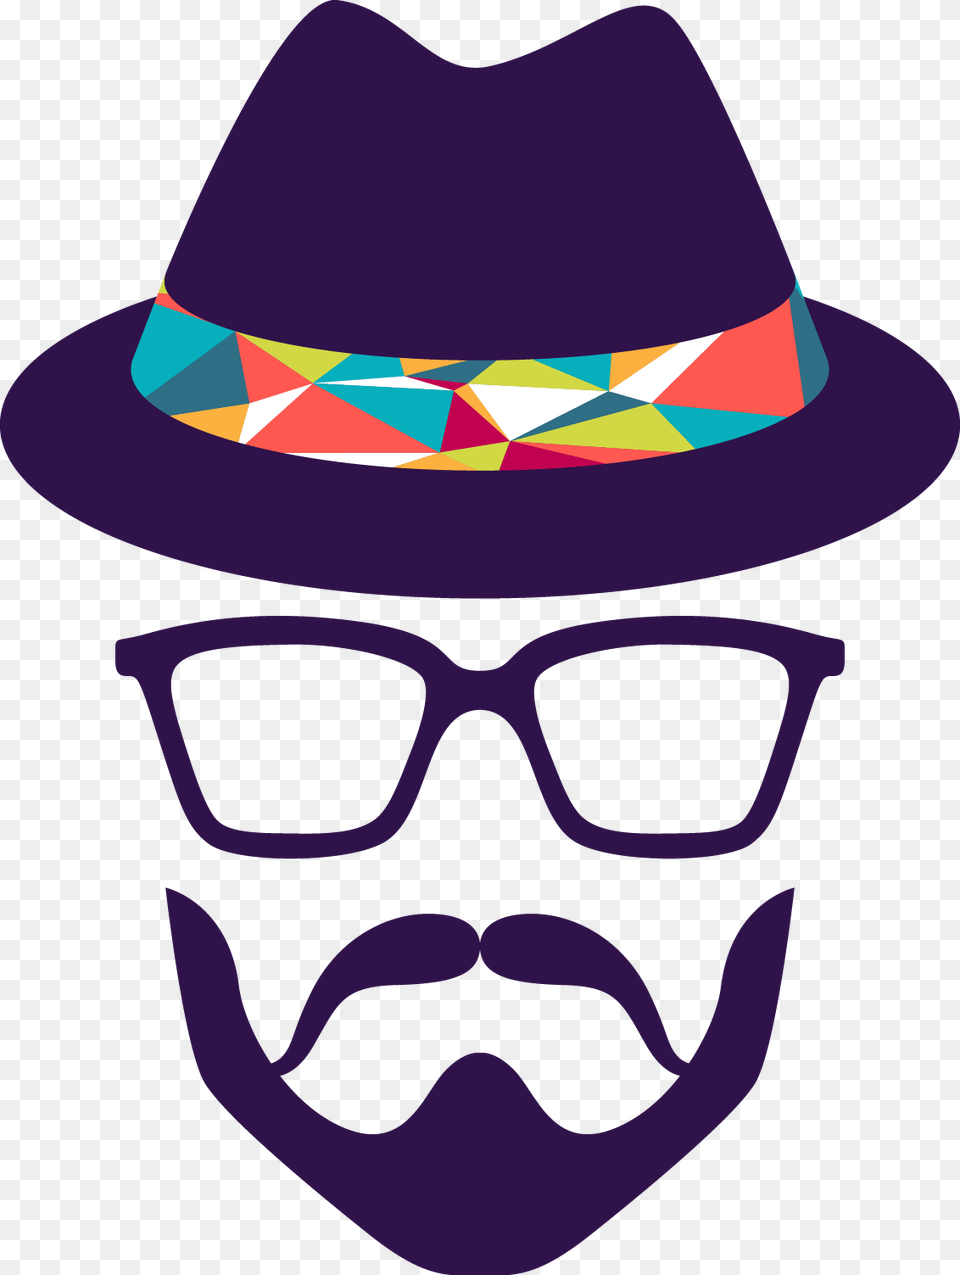 Download Style Fashion Men Beard Men Style, Clothing, Hat, Accessories, Glasses Png